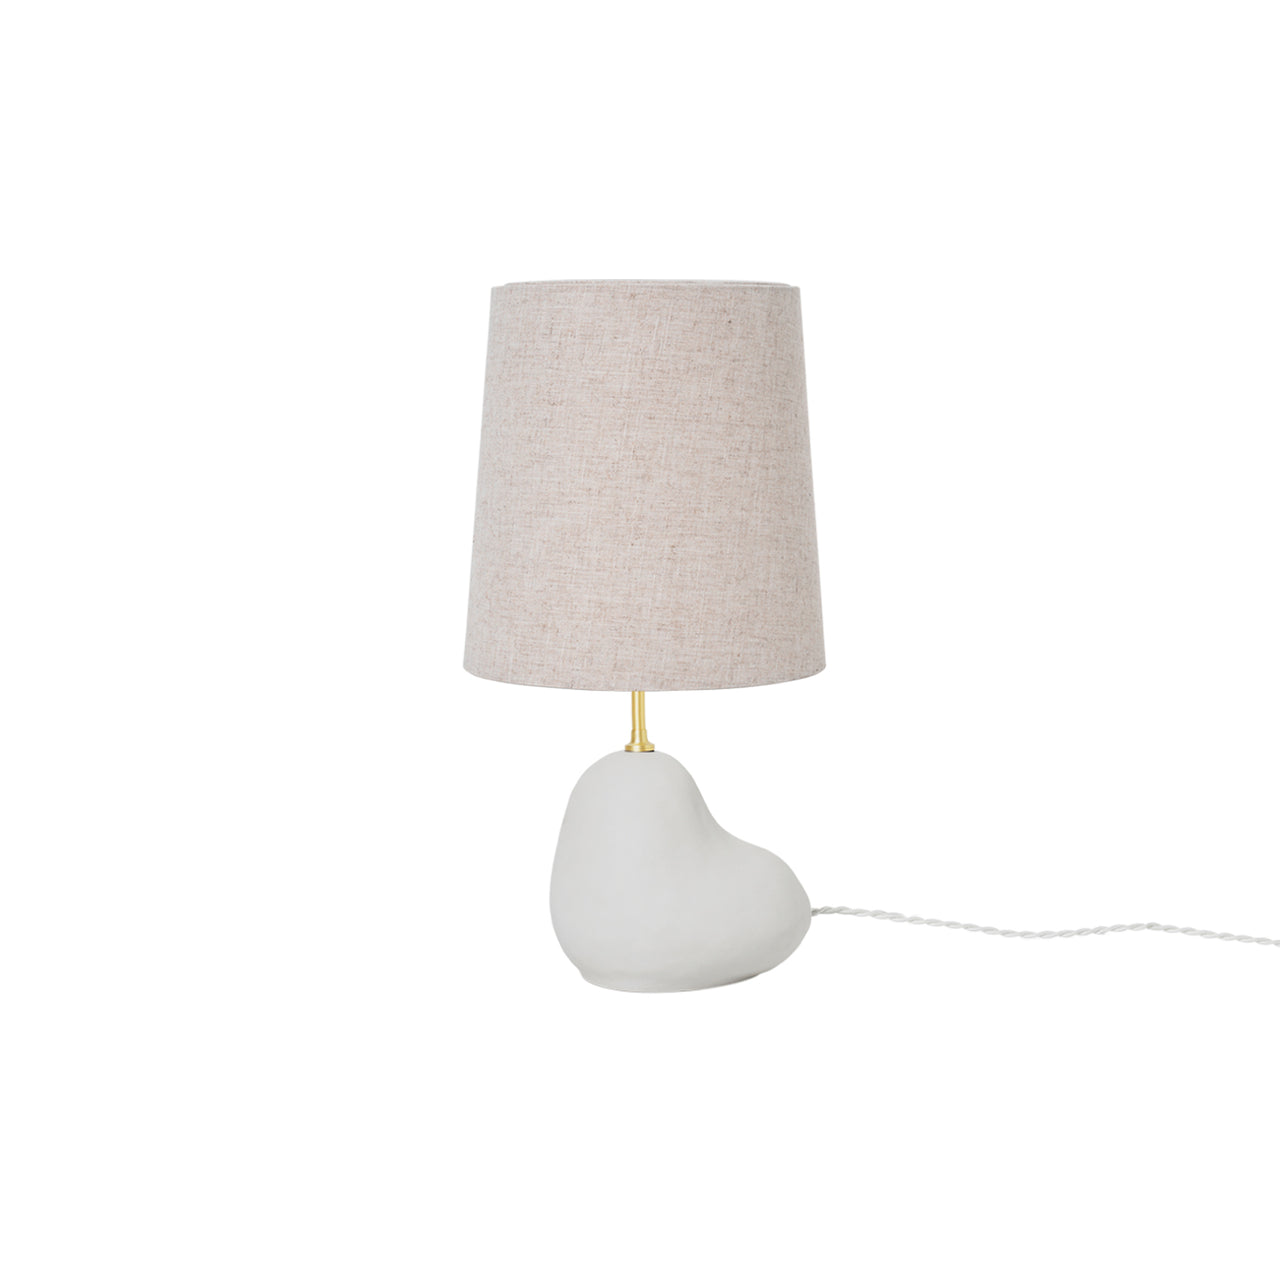 Hebe Lamp: Short + Natural + Off-White